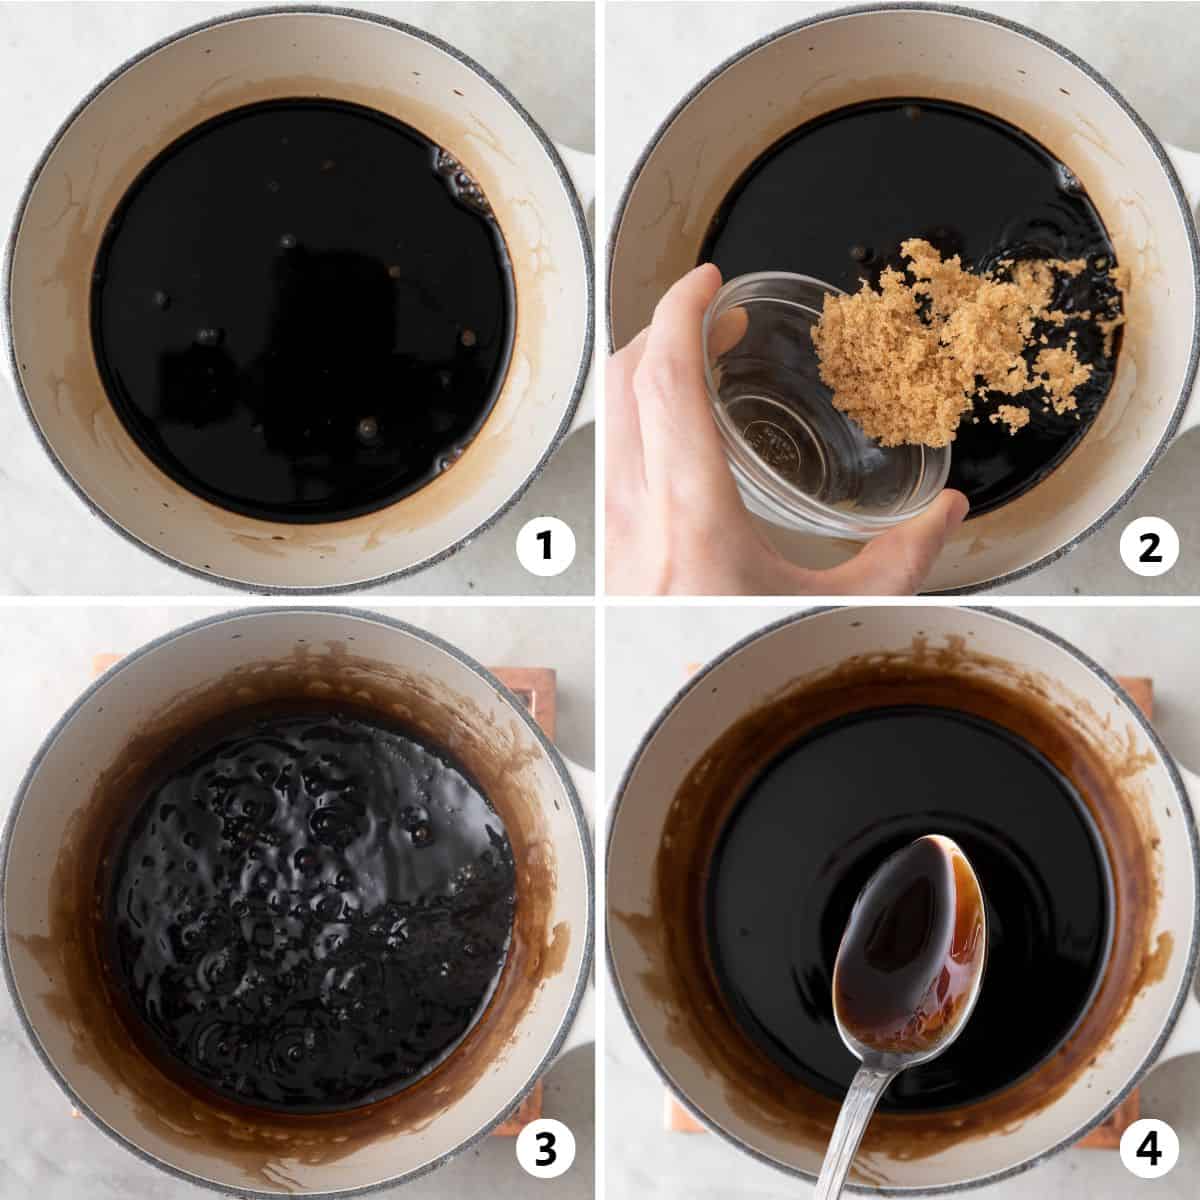 4 image collage making recipe in a pot: 1- balsamic vinegar in pot, 2- adding brown sugar, 3- mixture simmering with a bubbly top, 4- spoon lifting up final product with a spoon to show thickened consistency.